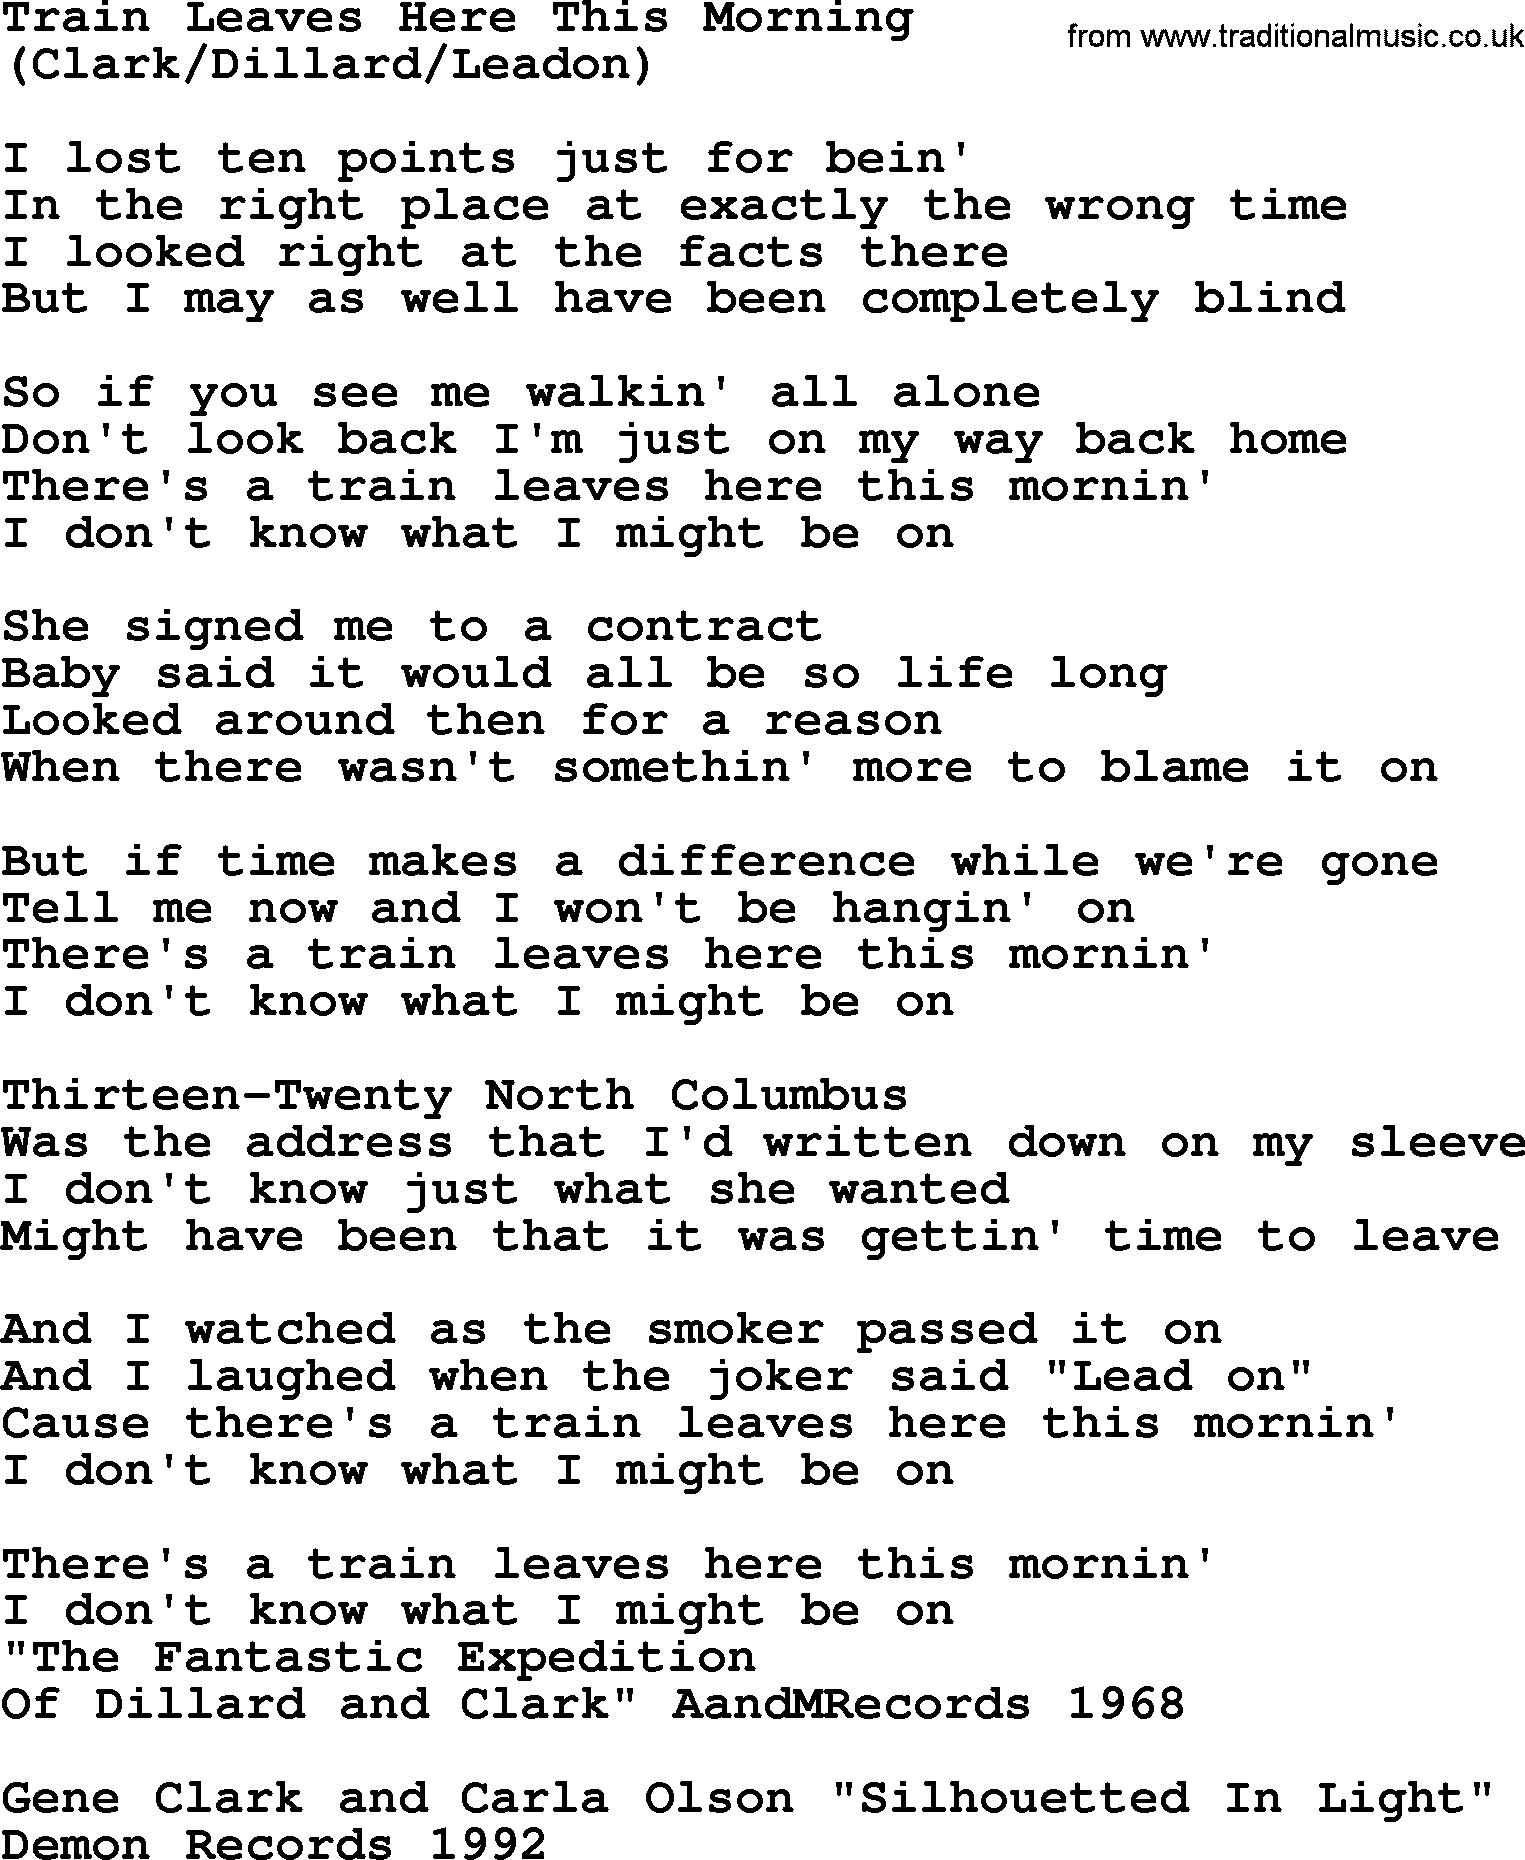 The Byrds song Train Leaves Here This Morning, lyrics